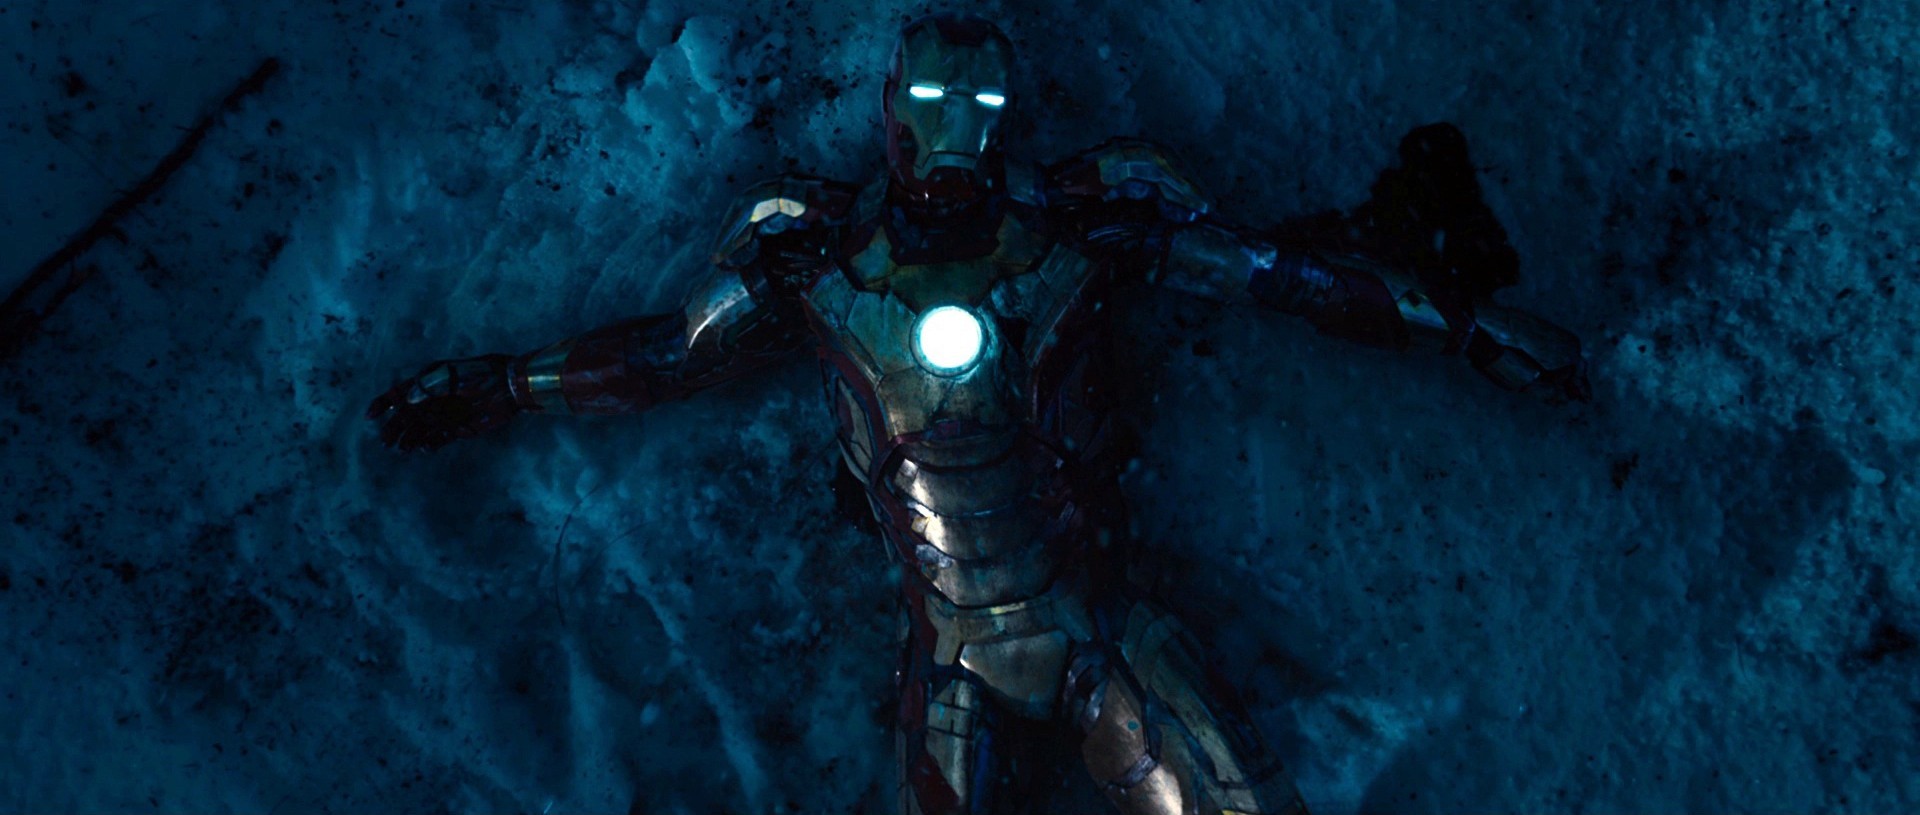 Iron Man 3 download the new for mac